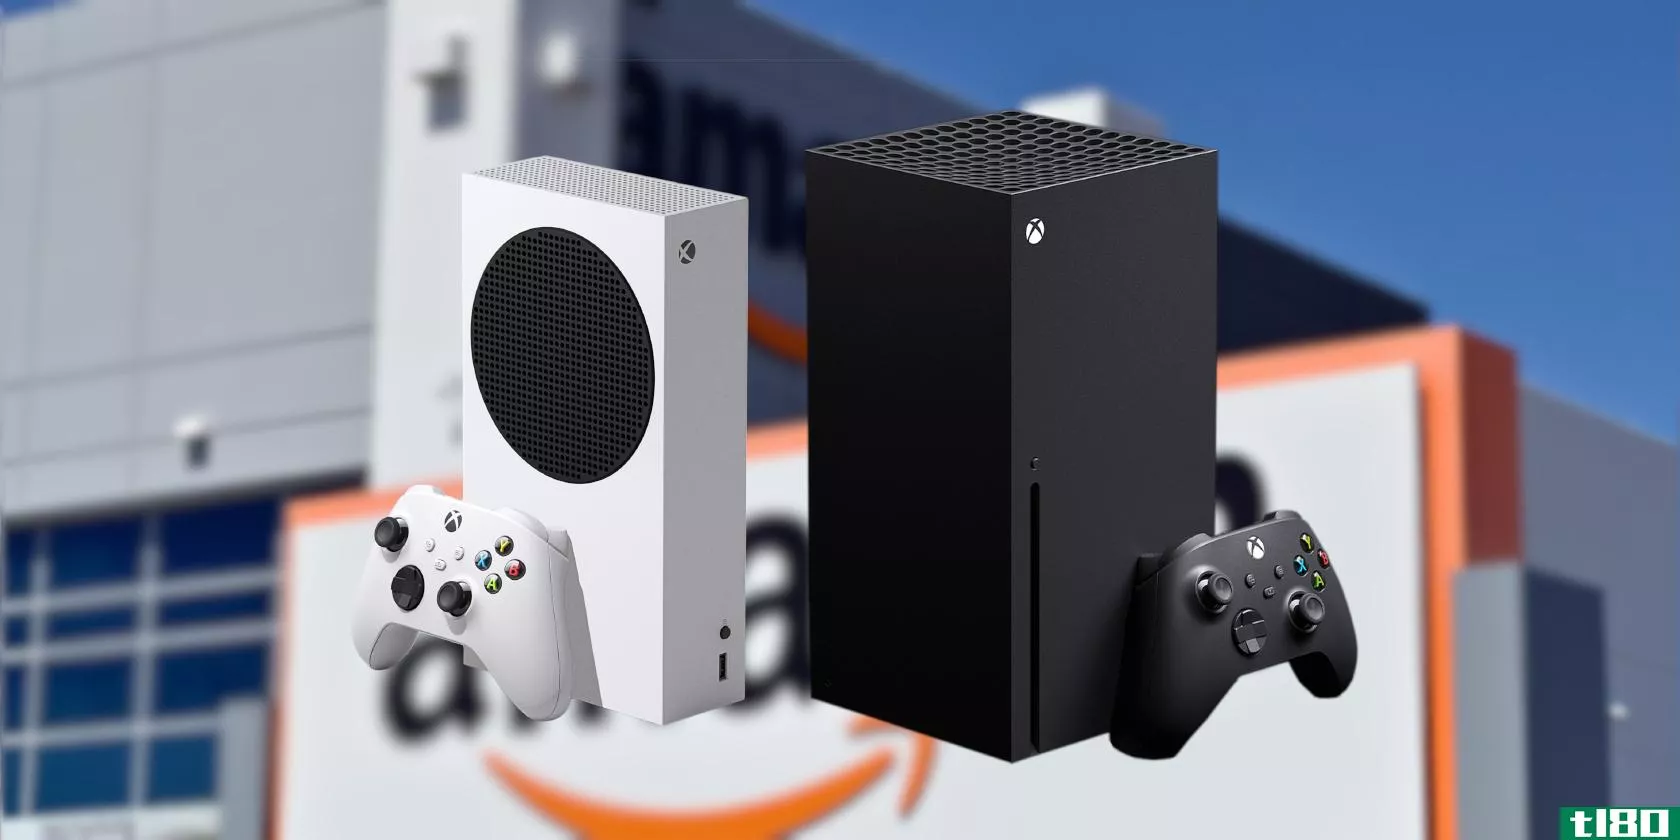 xbox series s and series x against amazon background